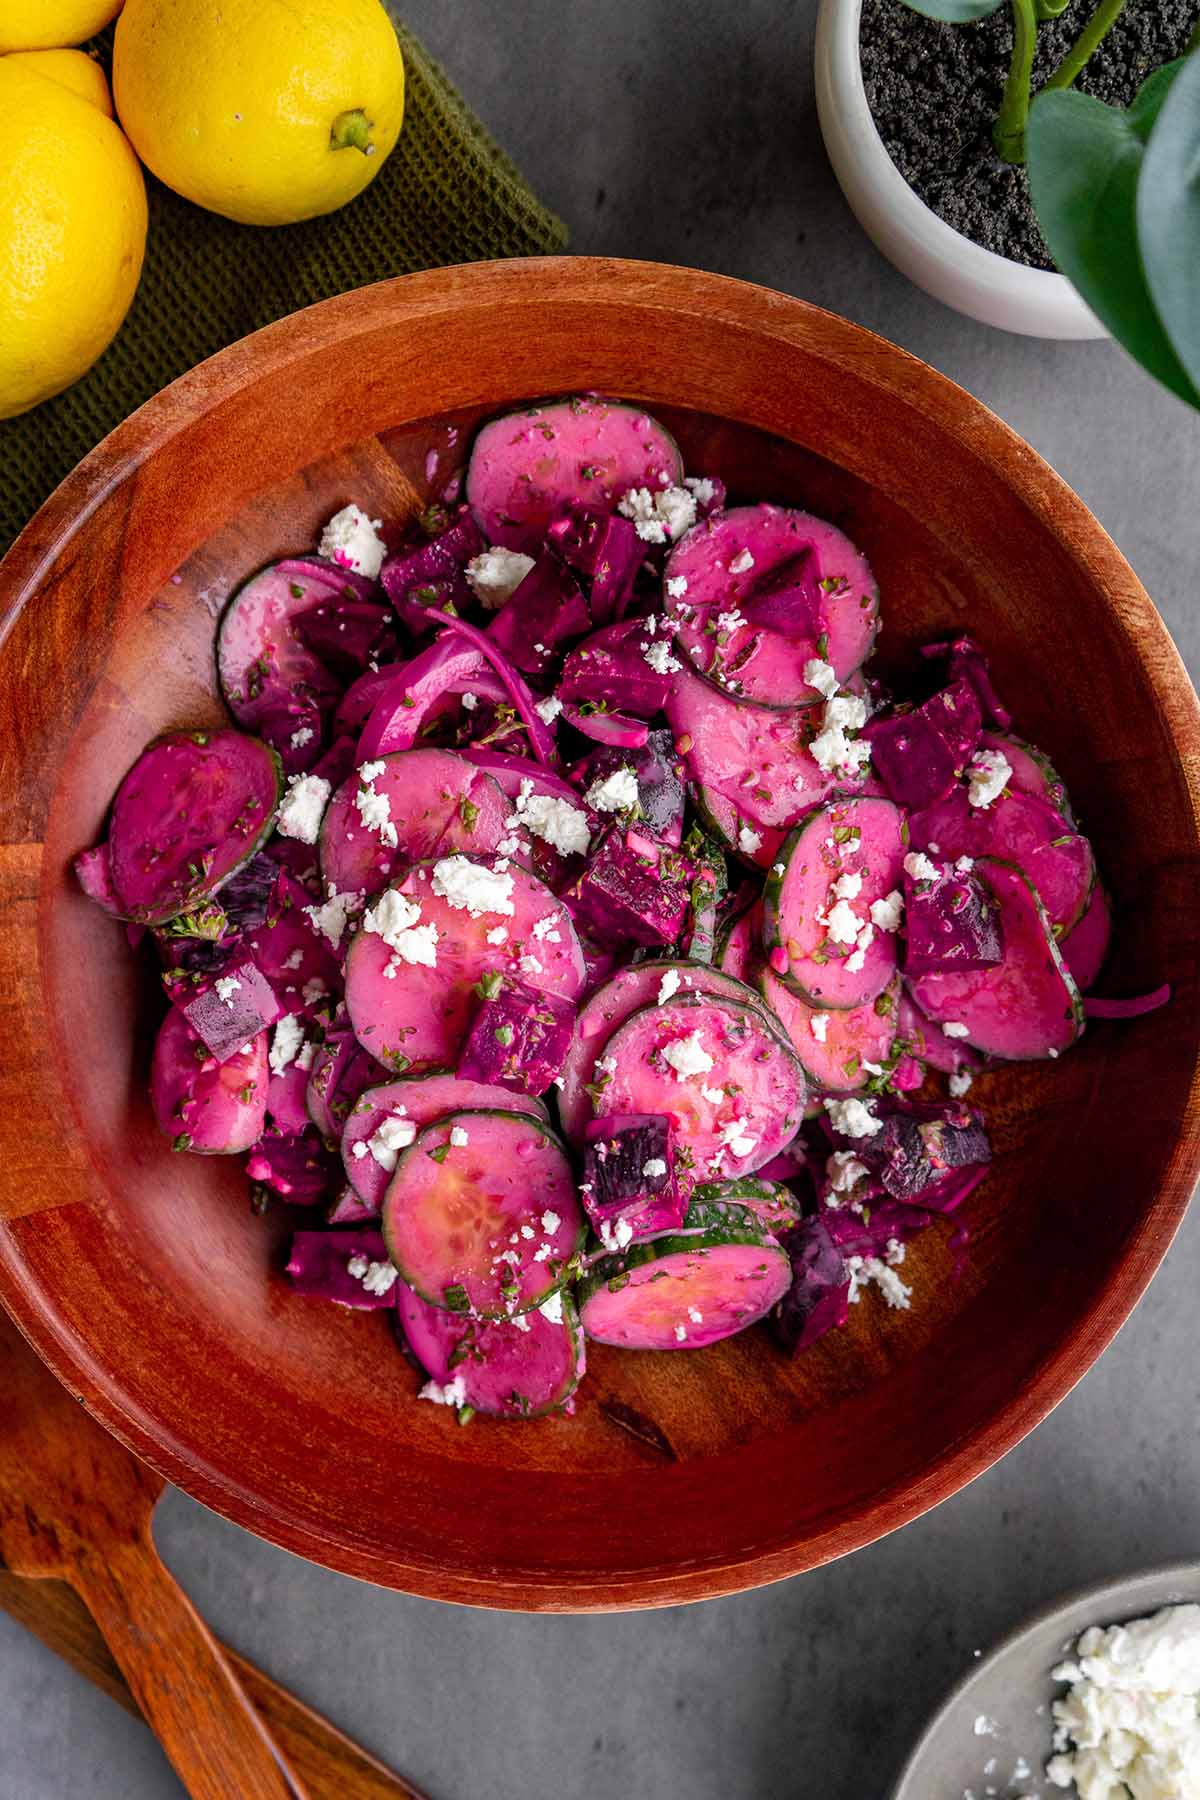 Beetroot and cucumber salad in a wood bowl with feta on top. Lemons are on the side